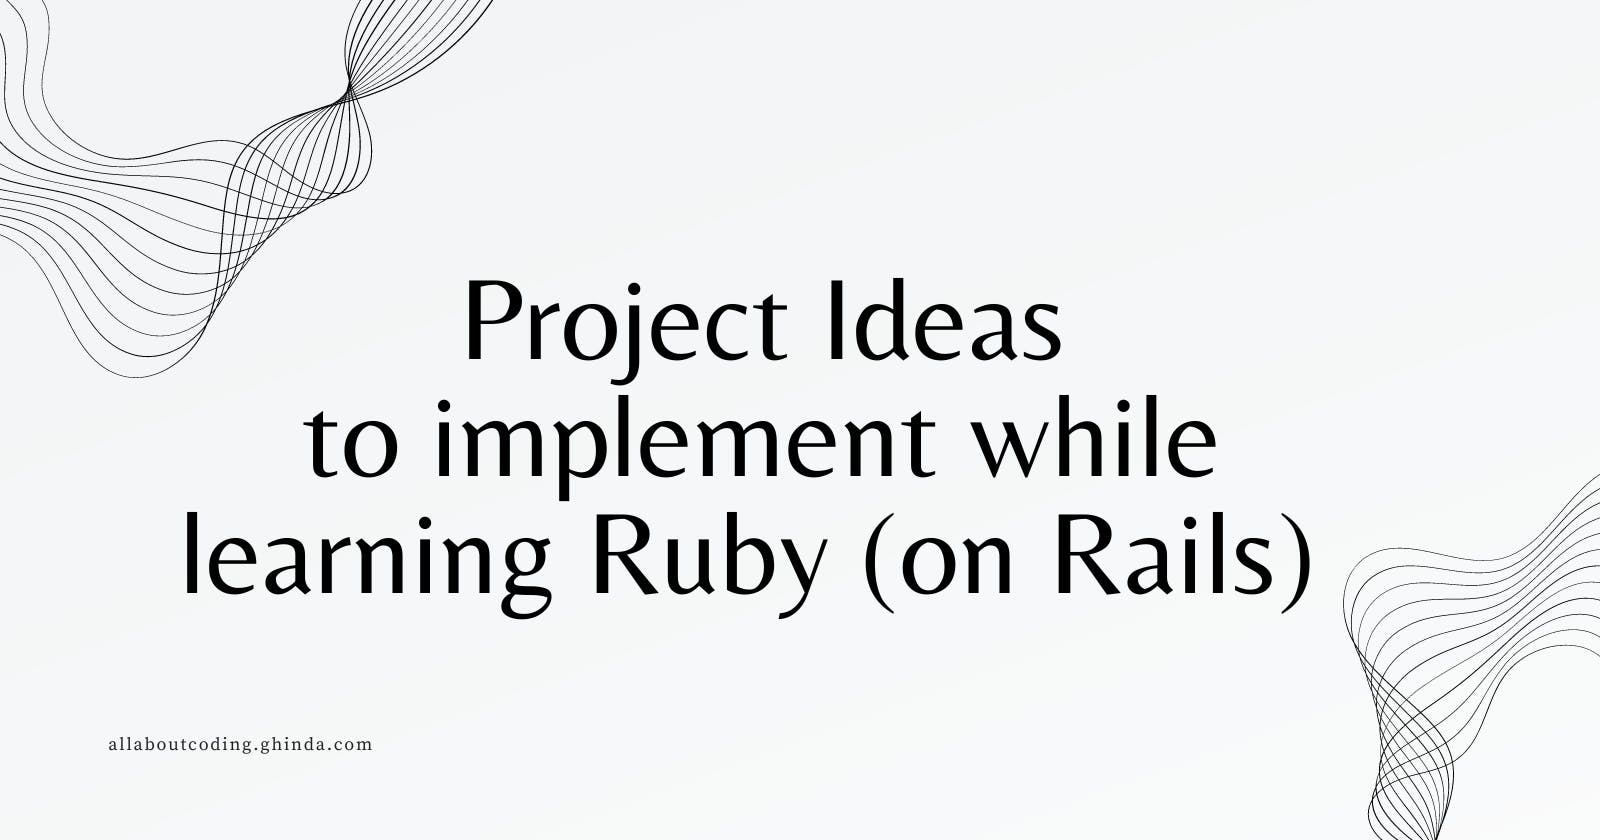 Projects ideas for learning Ruby or any Ruby web framework